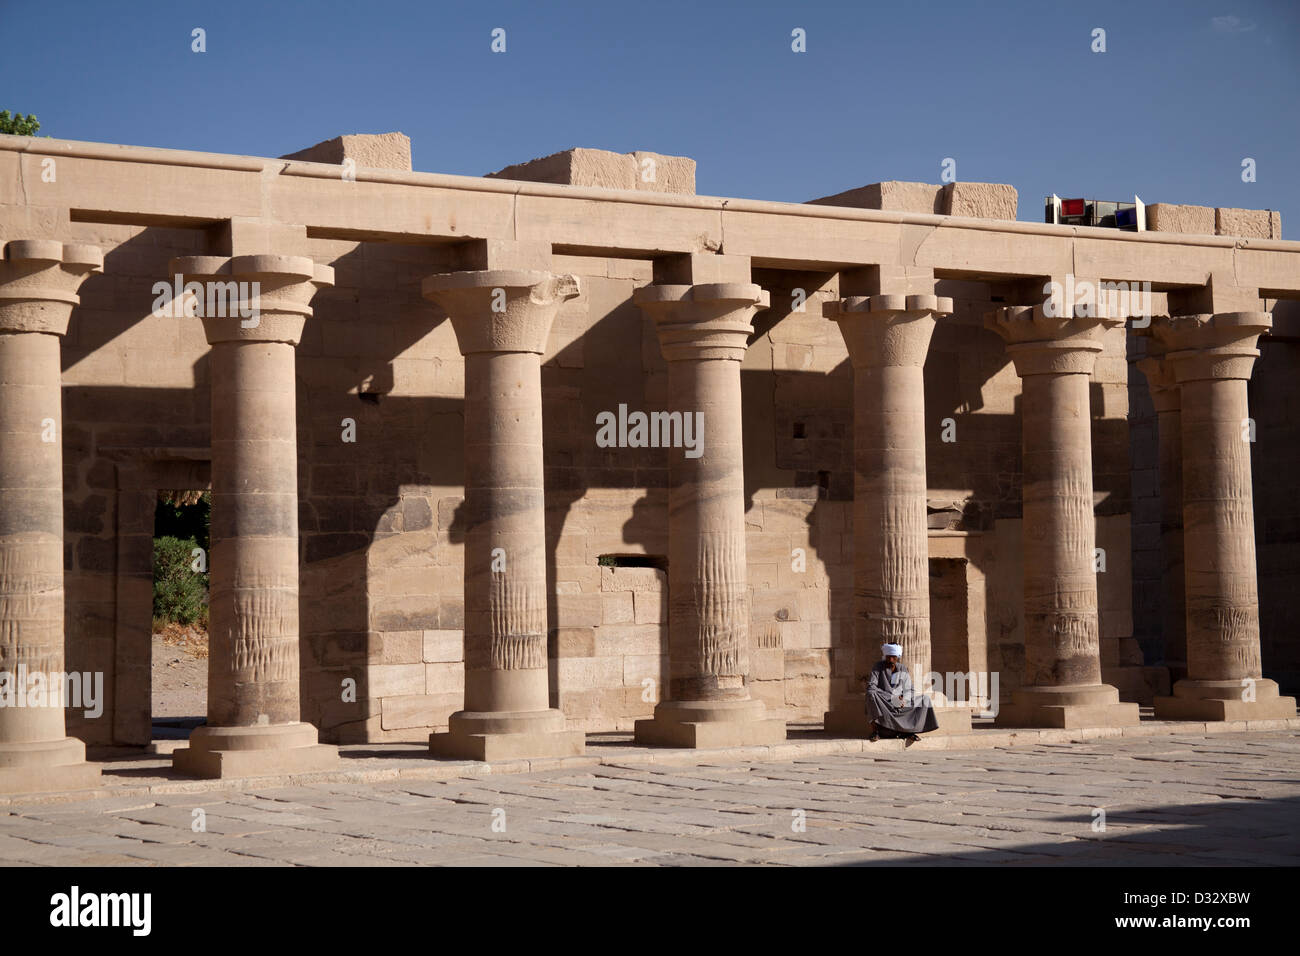 Temple of Philae on the Island of Agilika by the River Nile in Egypt Stock Photo